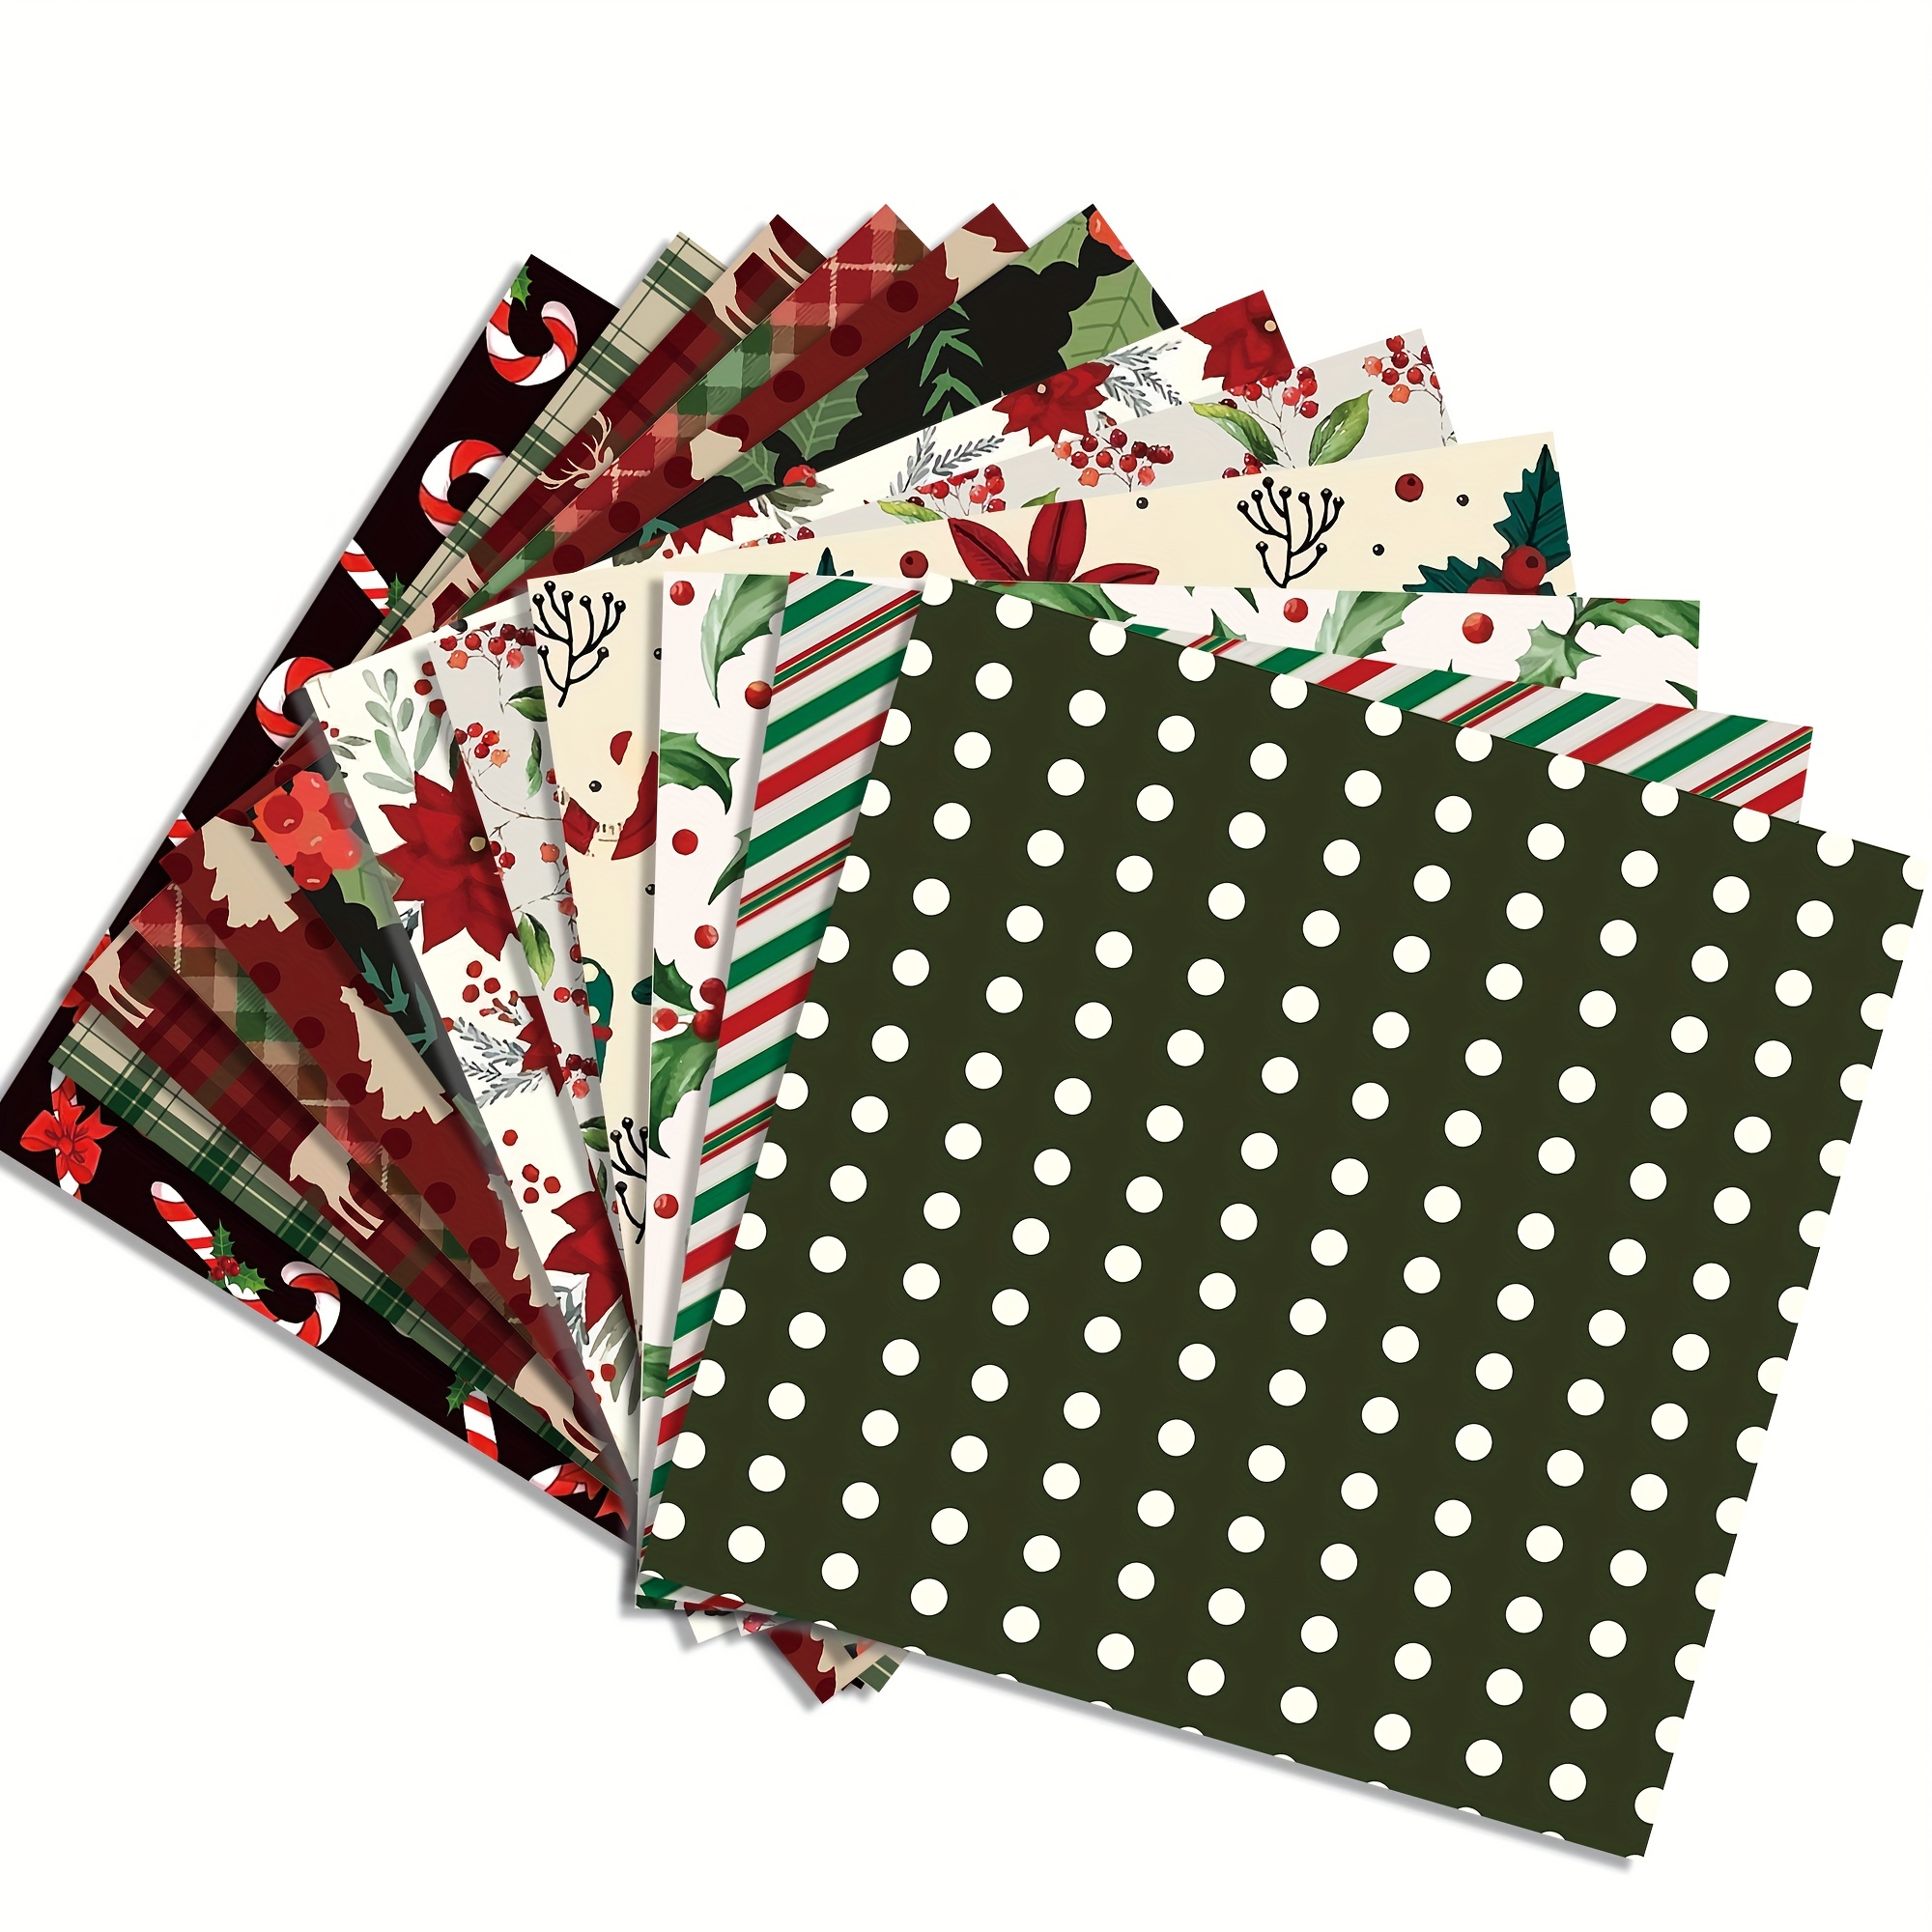 GLKTOPO 24 Sheets Christmas Pattern Scrapbook Paper, 12x12 Double-Sided  Red Green Textured Xmas Floral Craft Paper Folded Flat for DIY Card Making